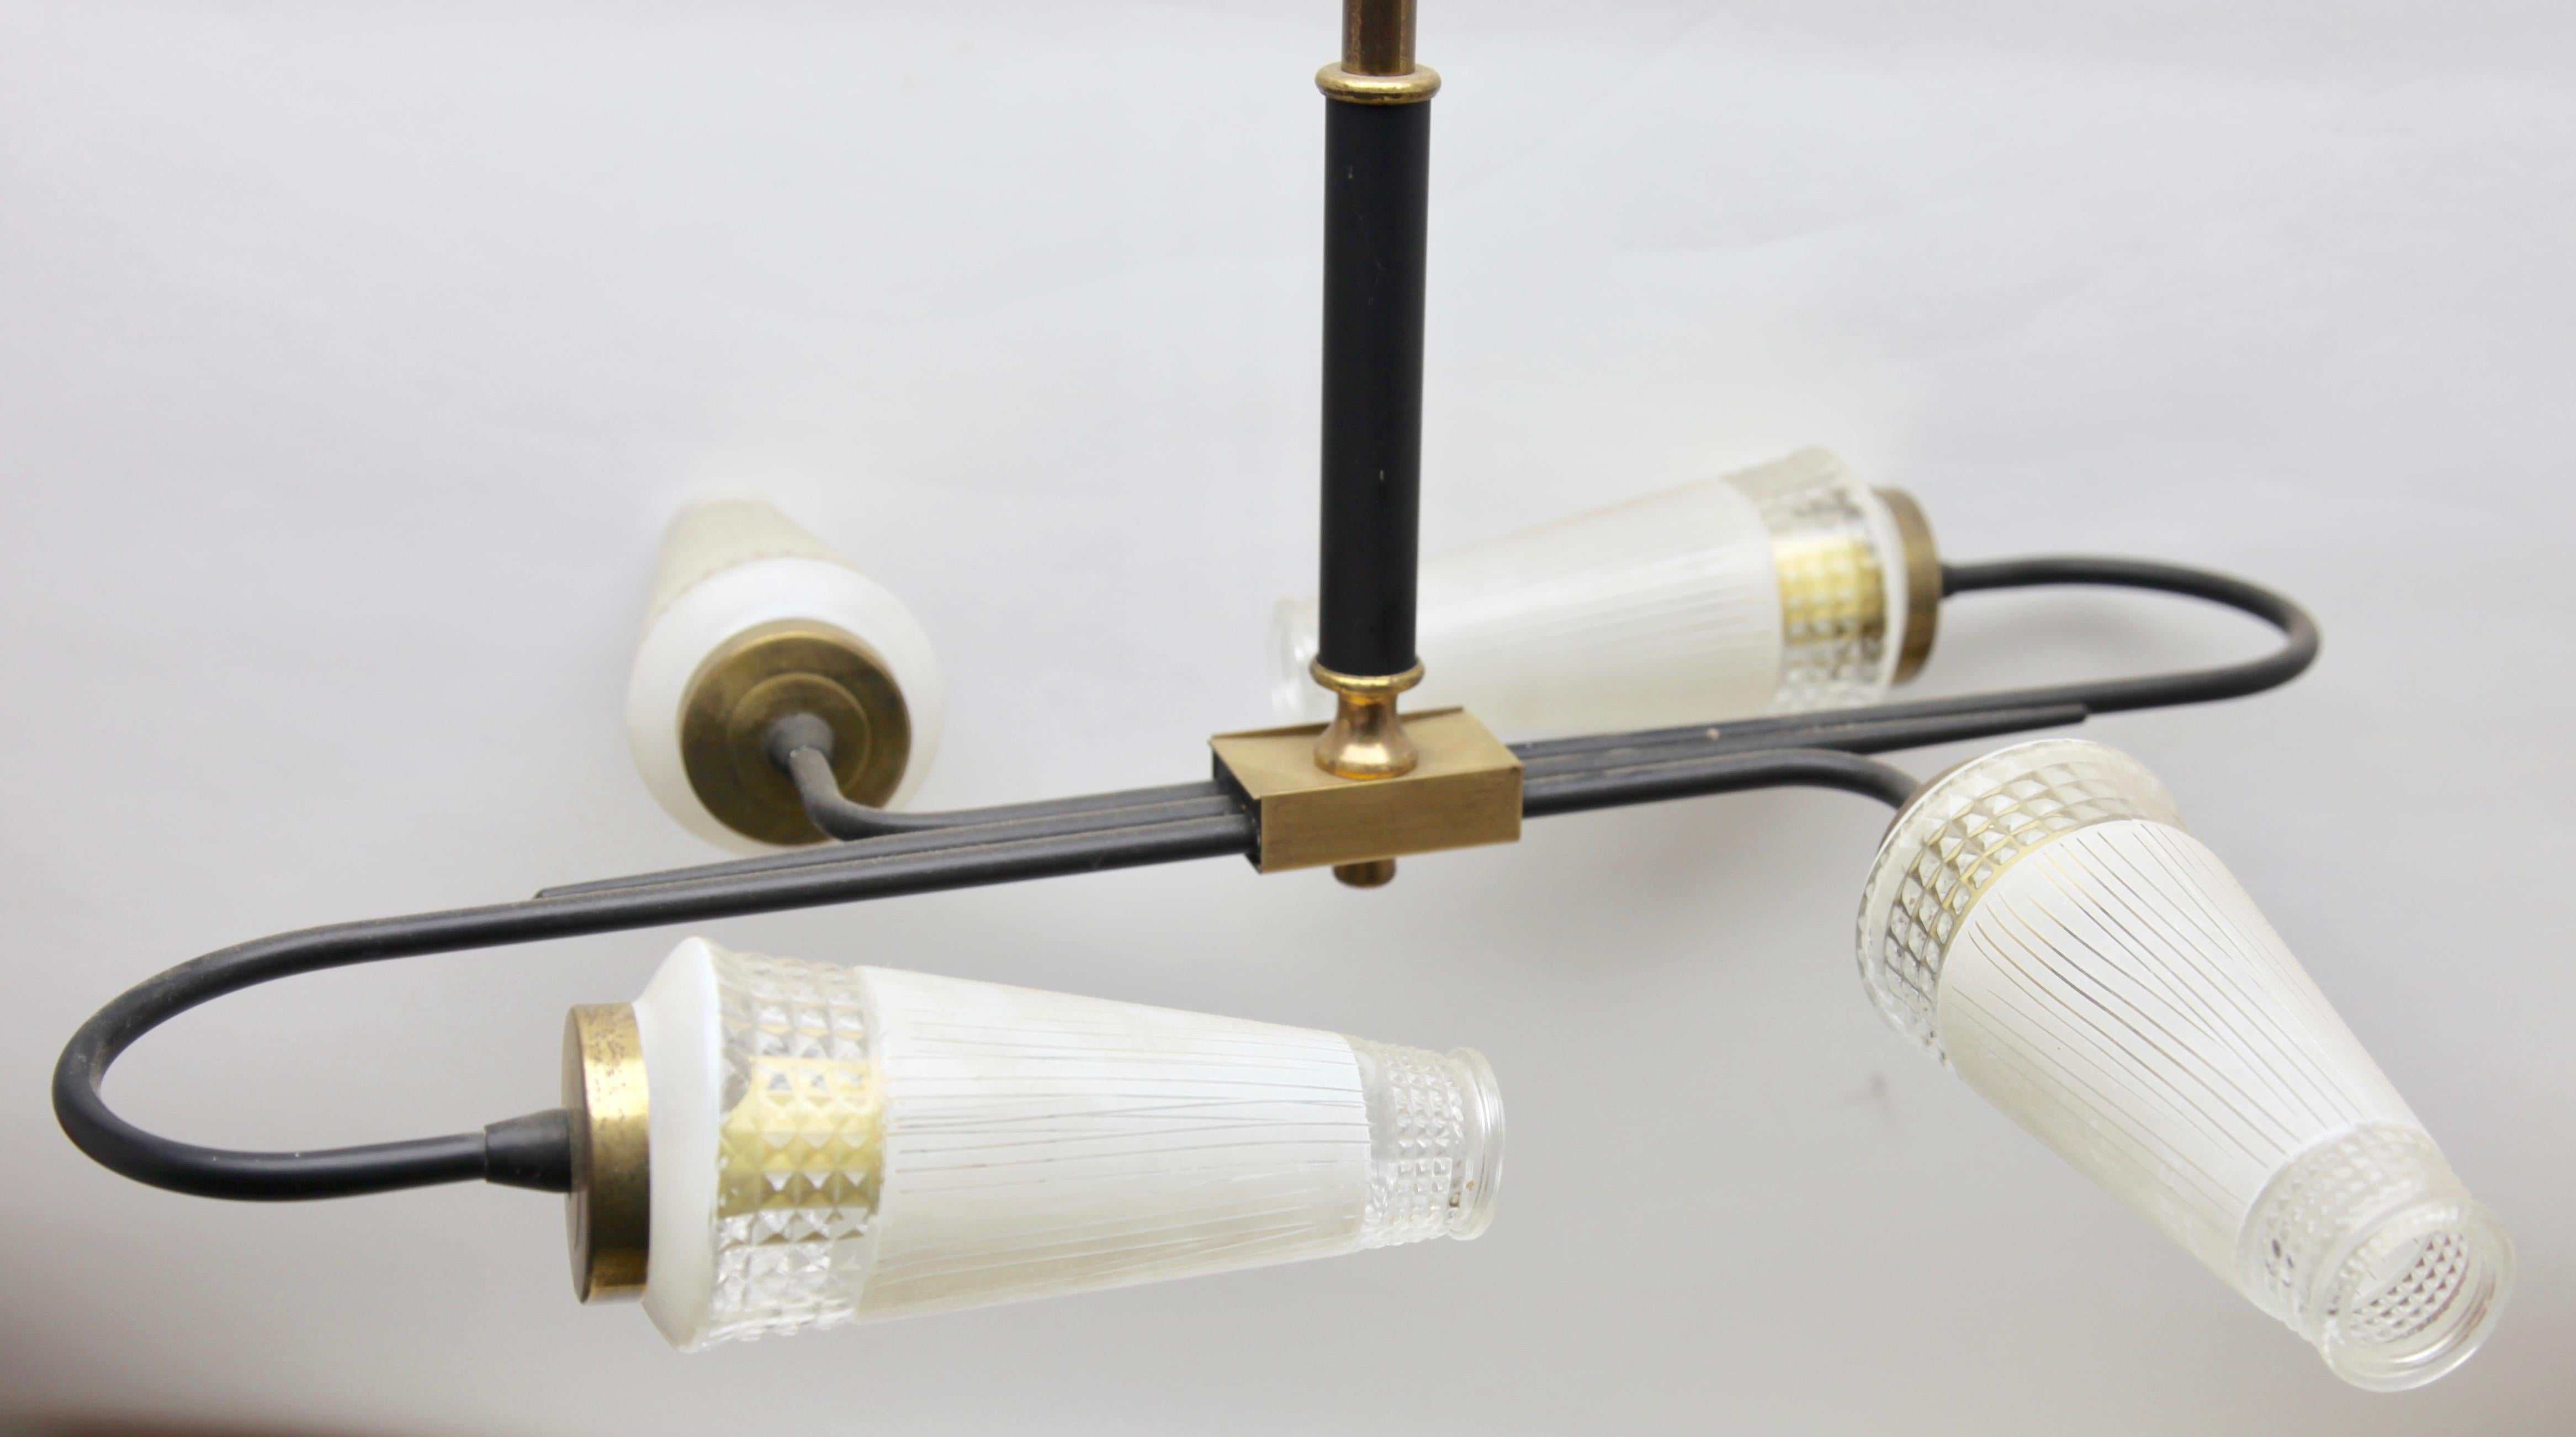 Dutch Asymmetrical Wall Light with Four Brass Rods Holding Clear Glass Shades, 1960s For Sale